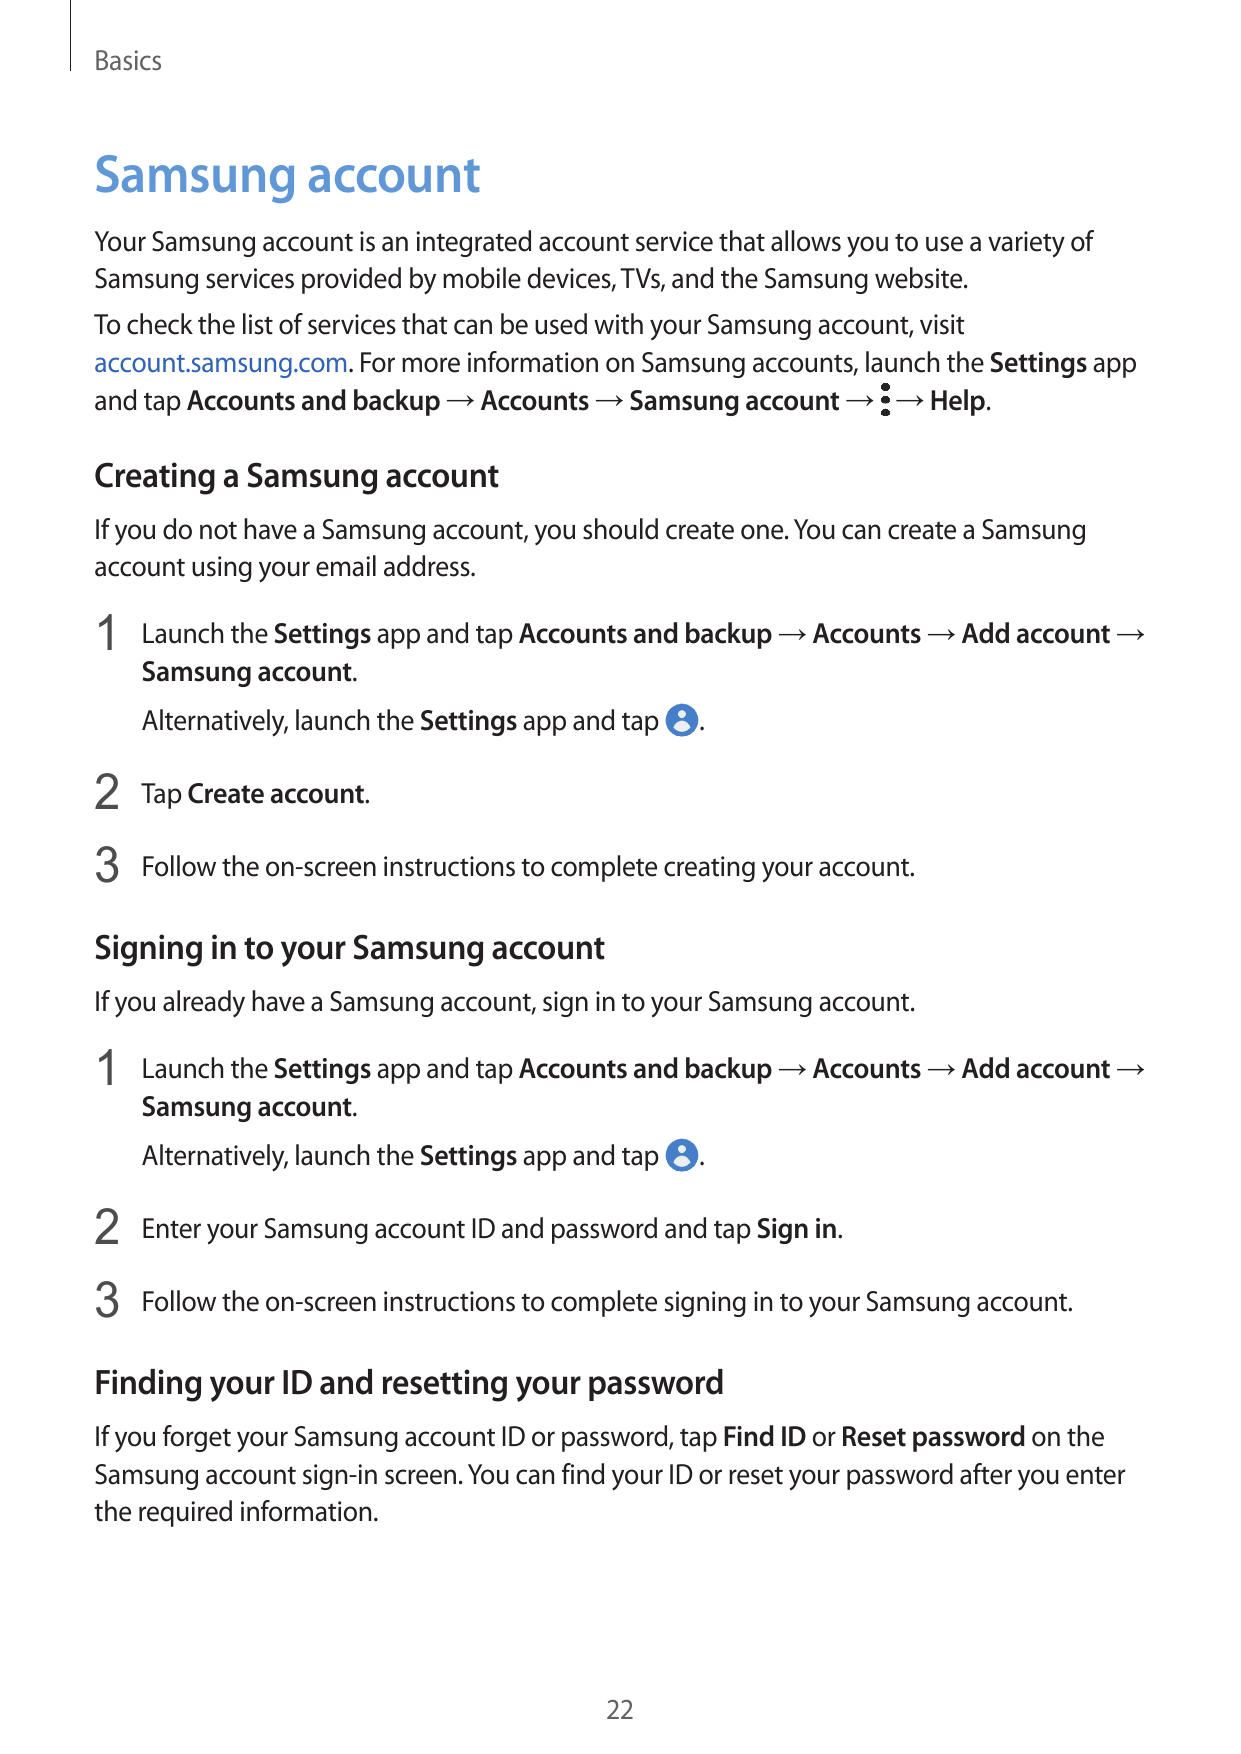 BasicsSamsung accountYour Samsung account is an integrated account service that allows you to use a variety ofSamsung services p